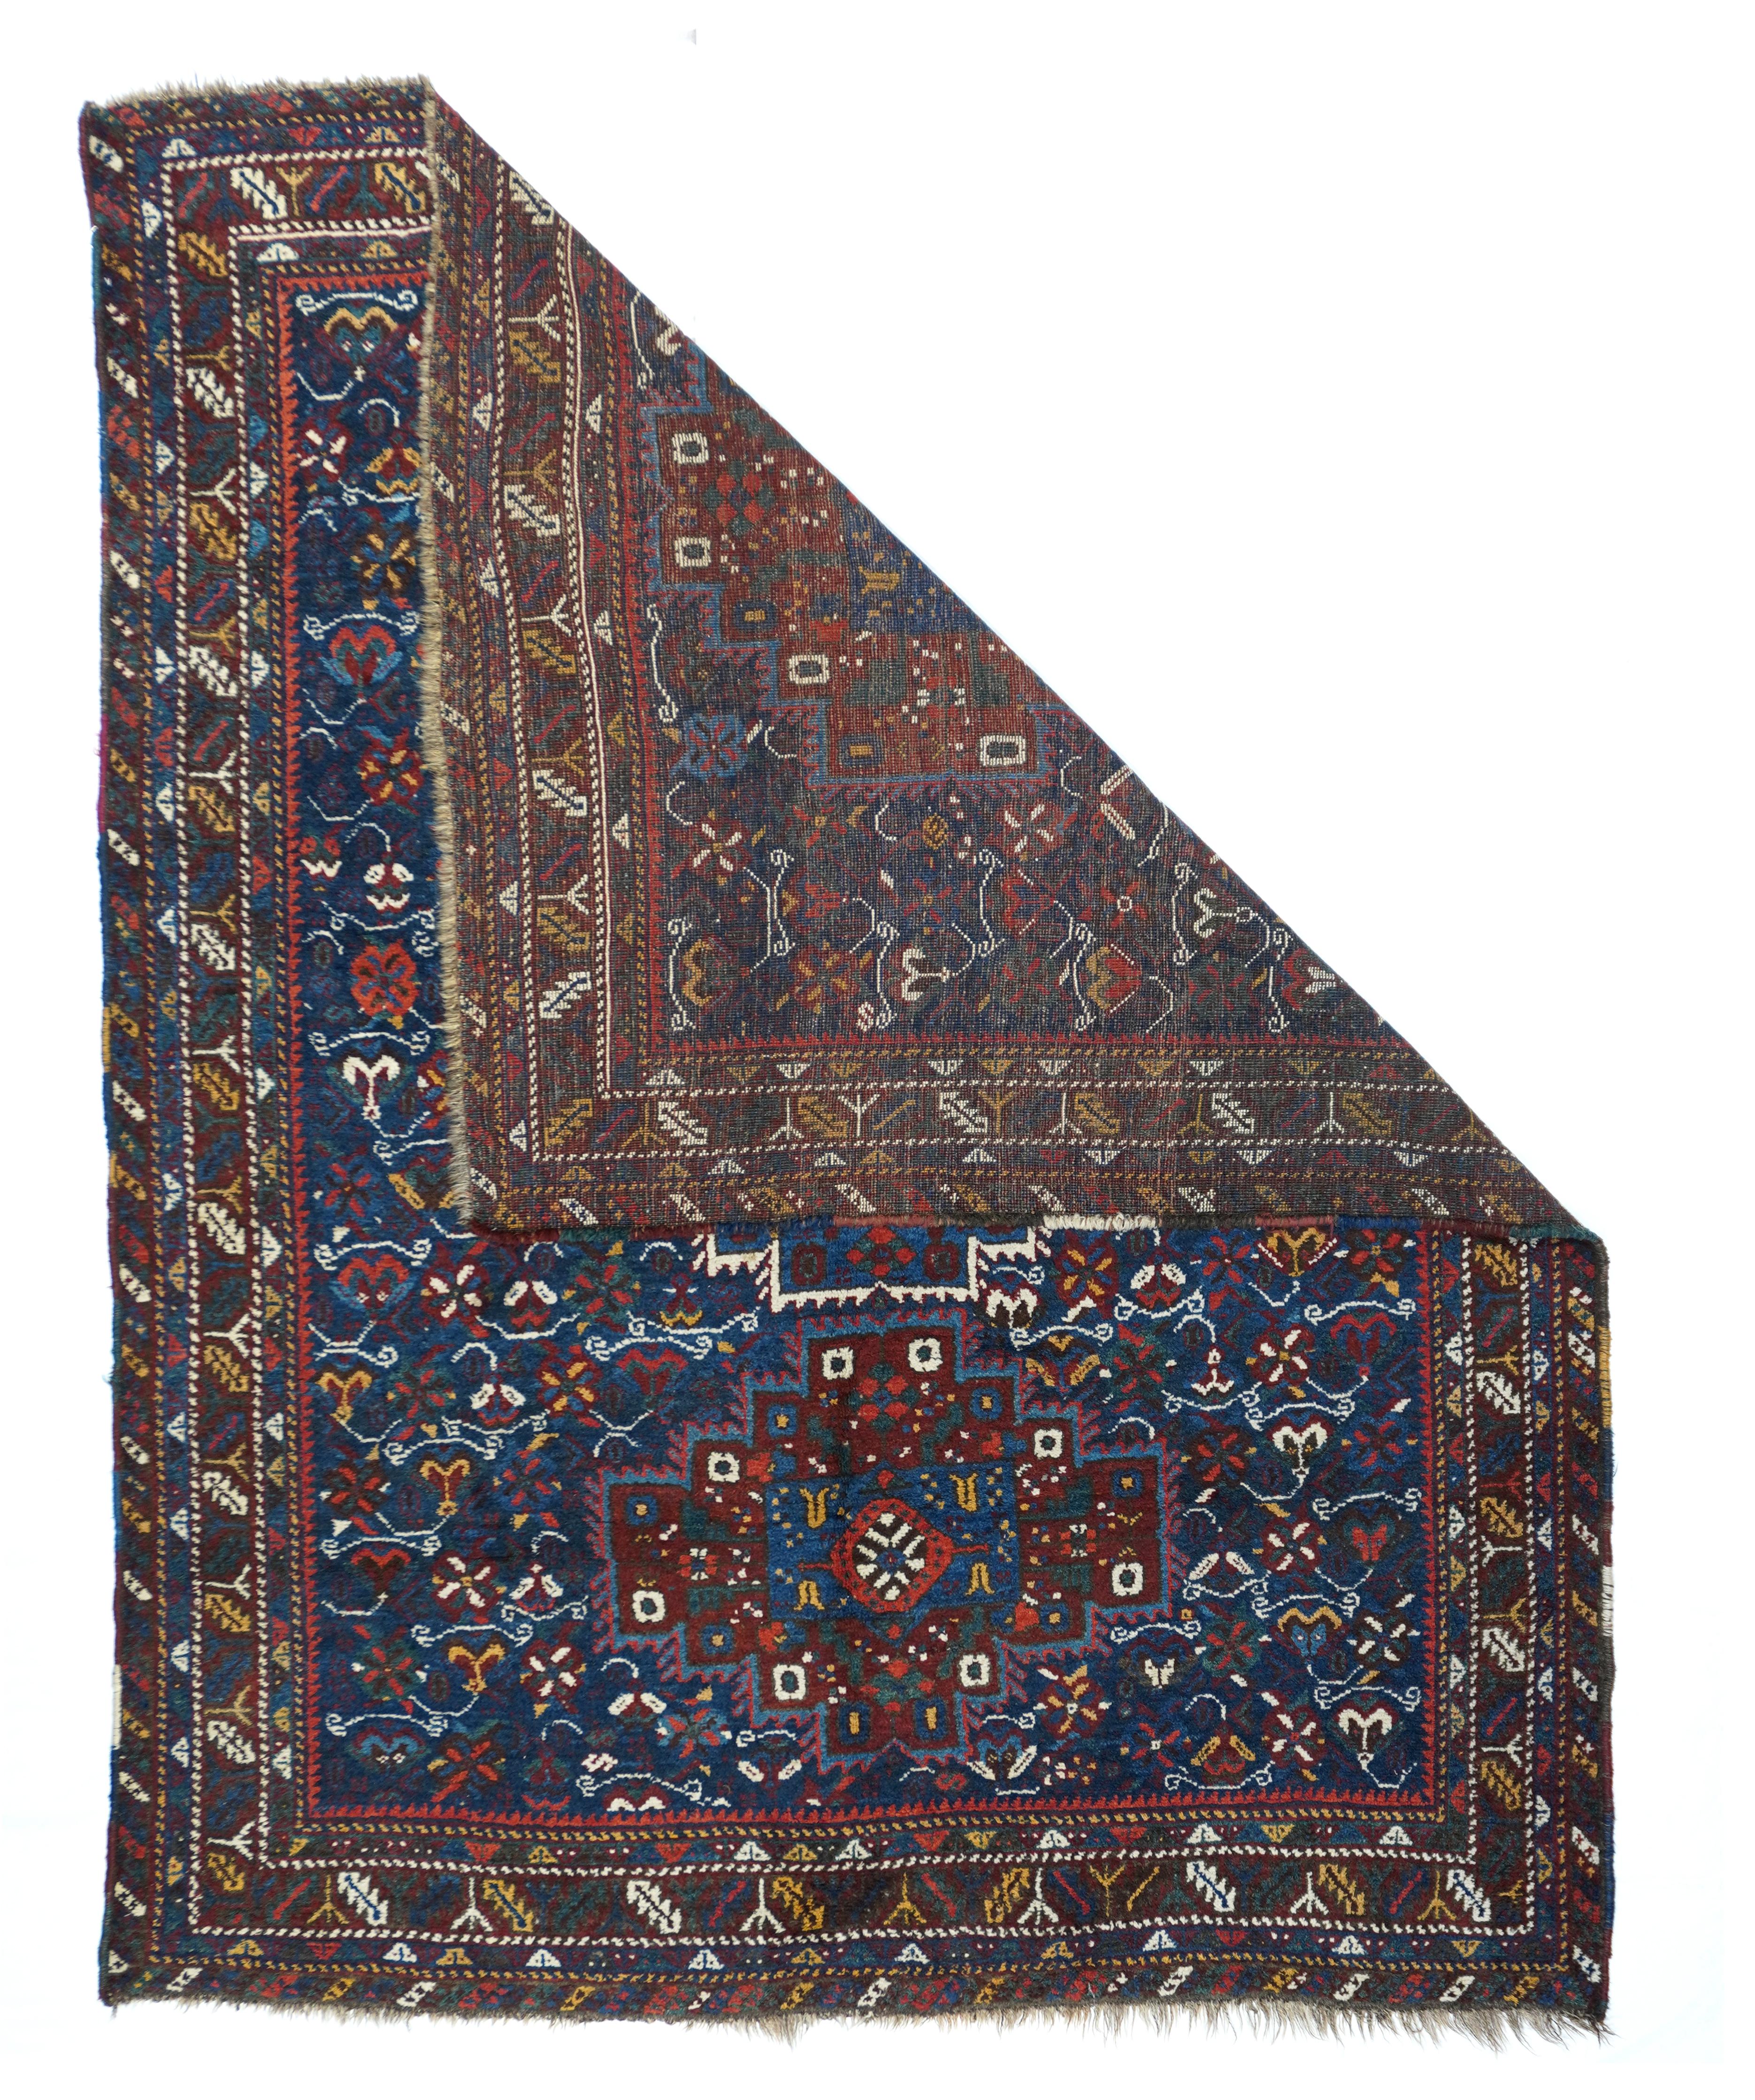 Antique Quashkai Shiraz rug measures 5'5'' x 7'1''. Not southwest Persian, but likely a SE Persian tribal creation with excellent indigo blues, both royal and cerulean. Three stepped octagon medallions are fringed in green or ivory and filled in